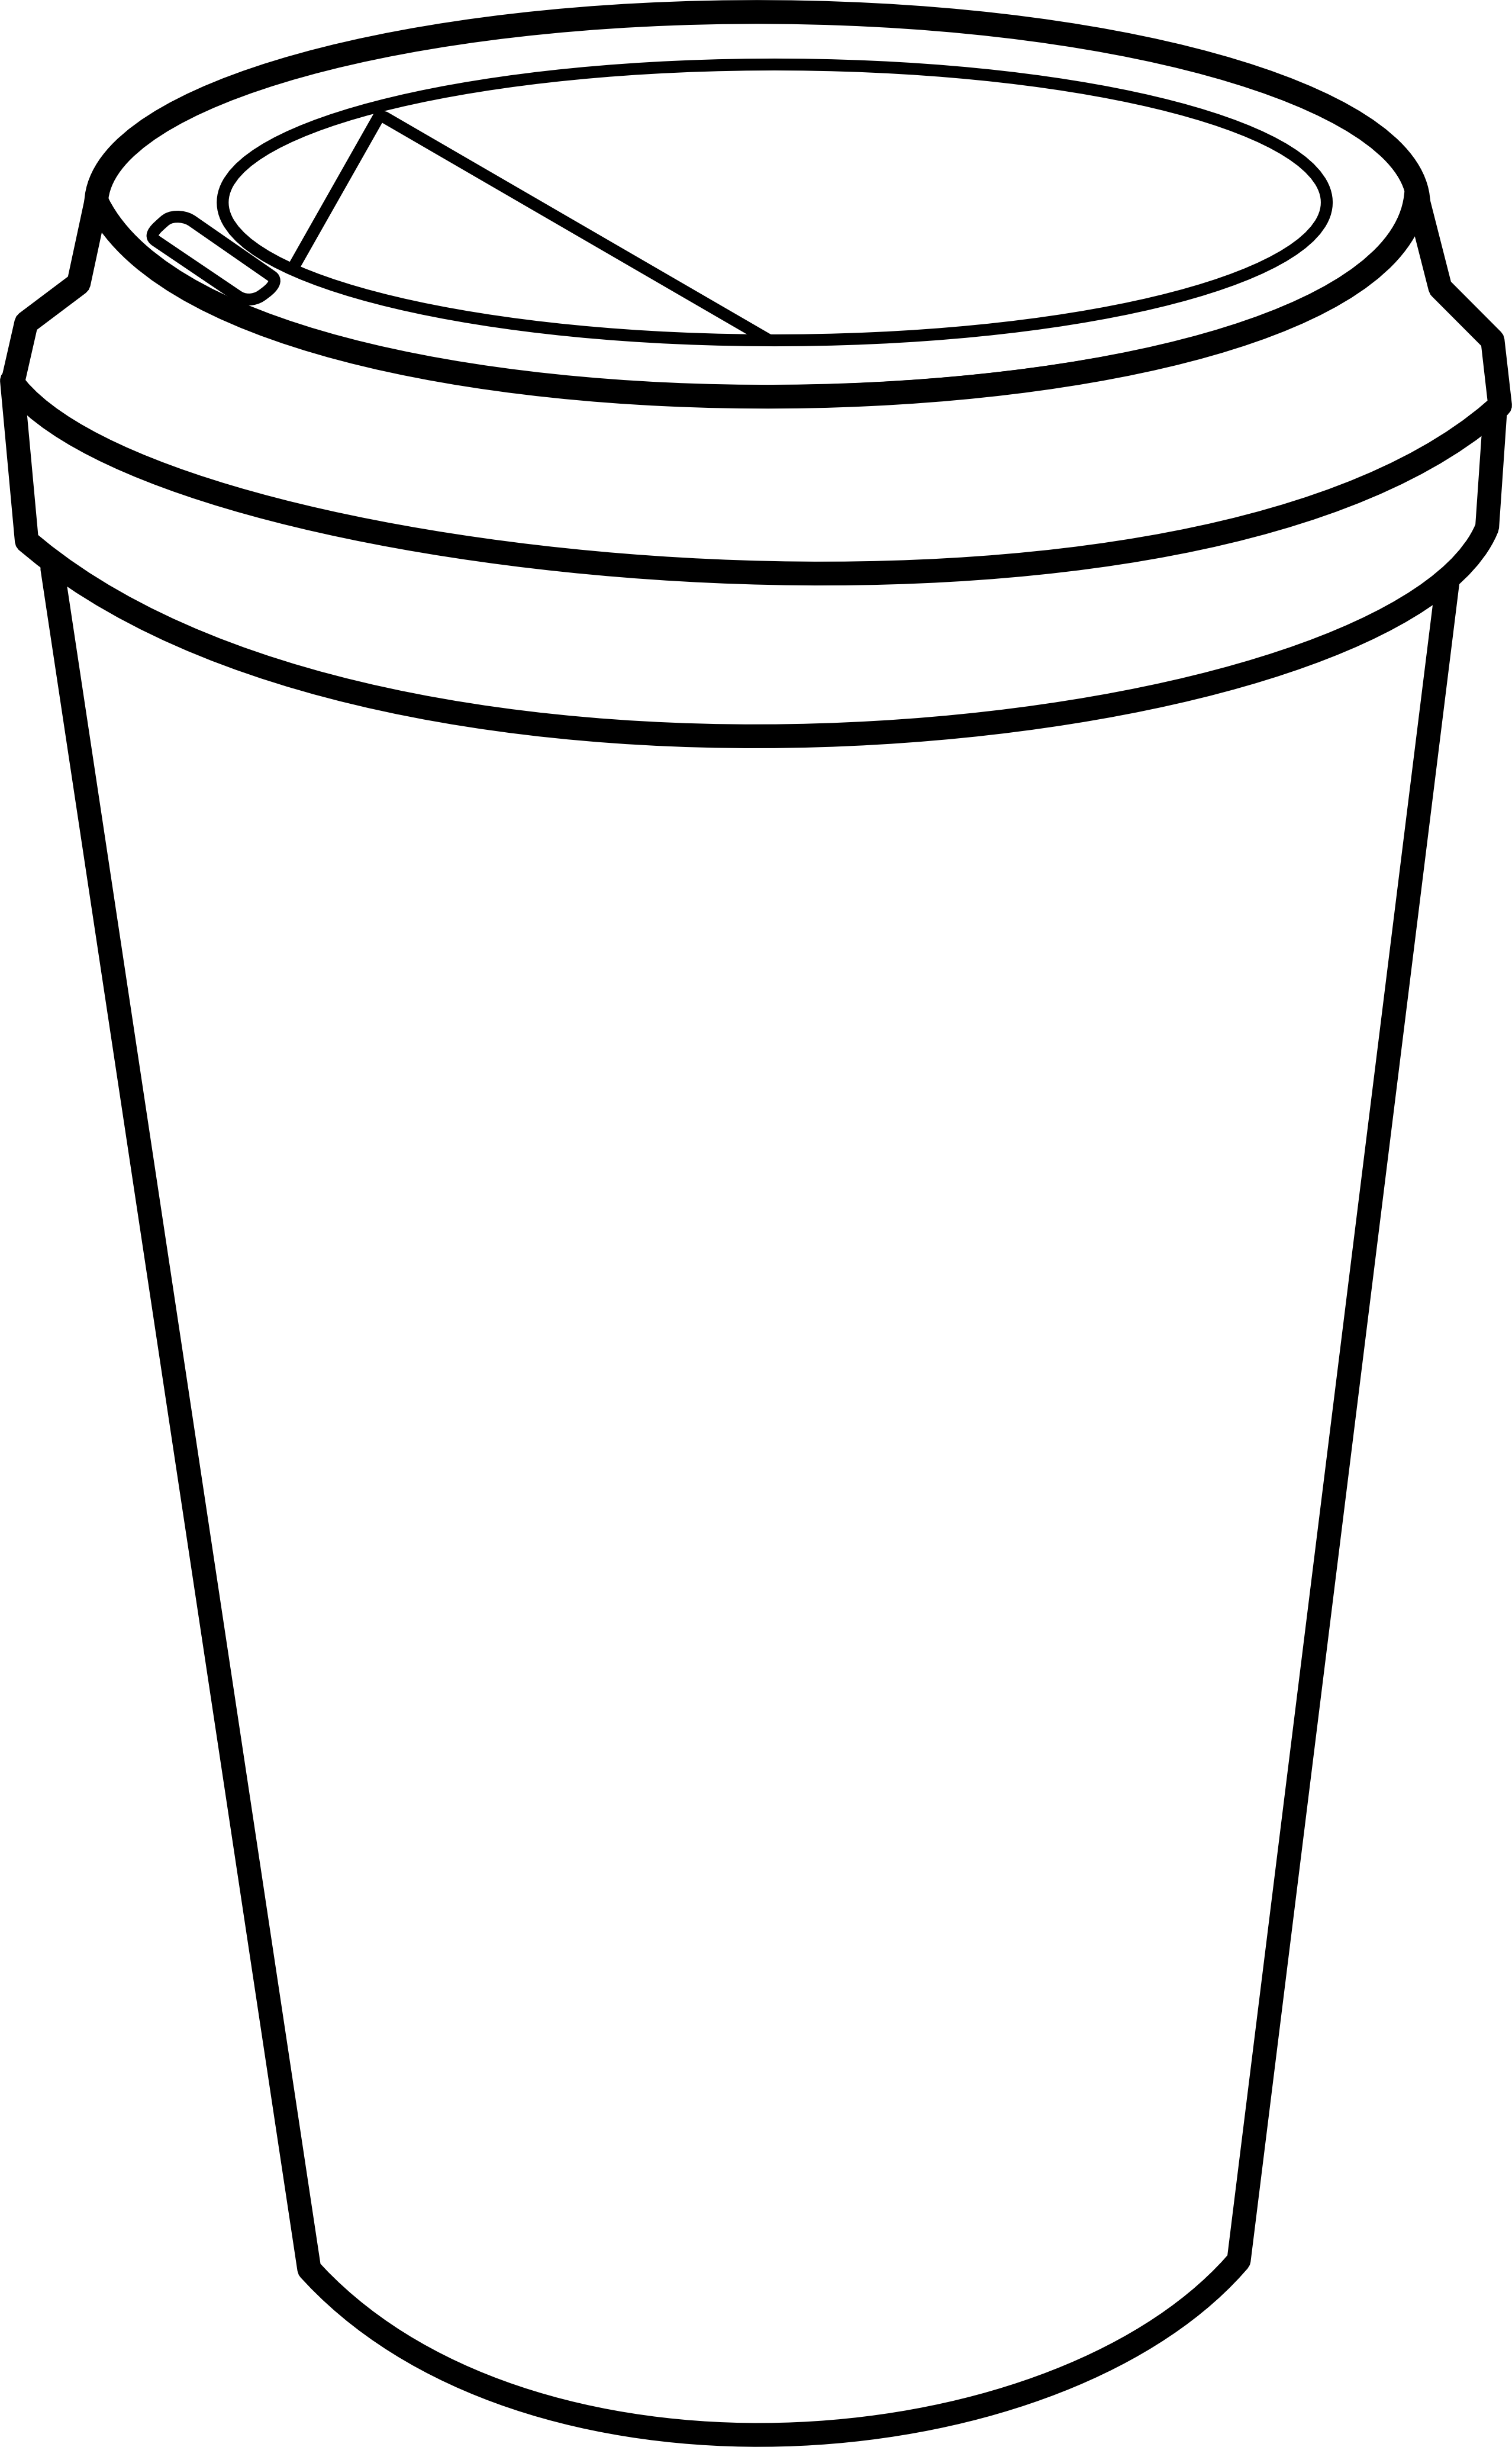 Cups coloring pages download and print for free